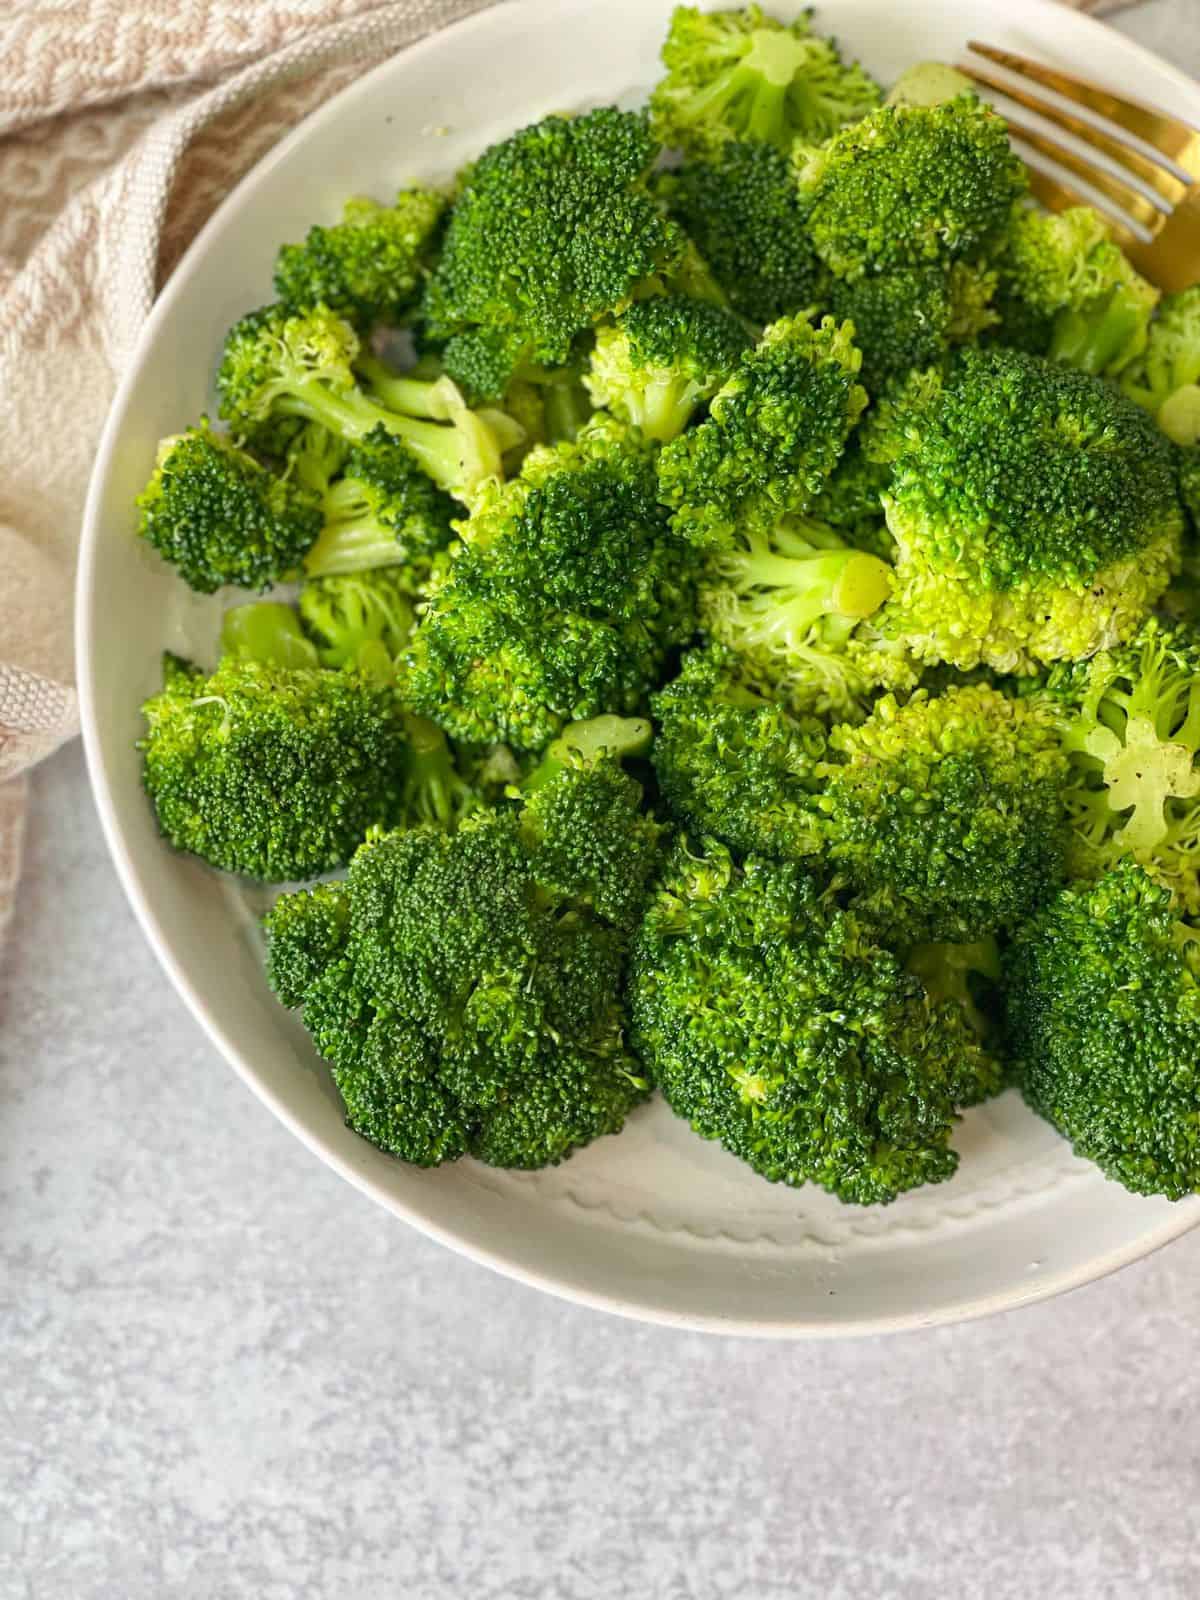 TasteGreatFoodie - Perfectly Boiled and Seasoned Broccoli